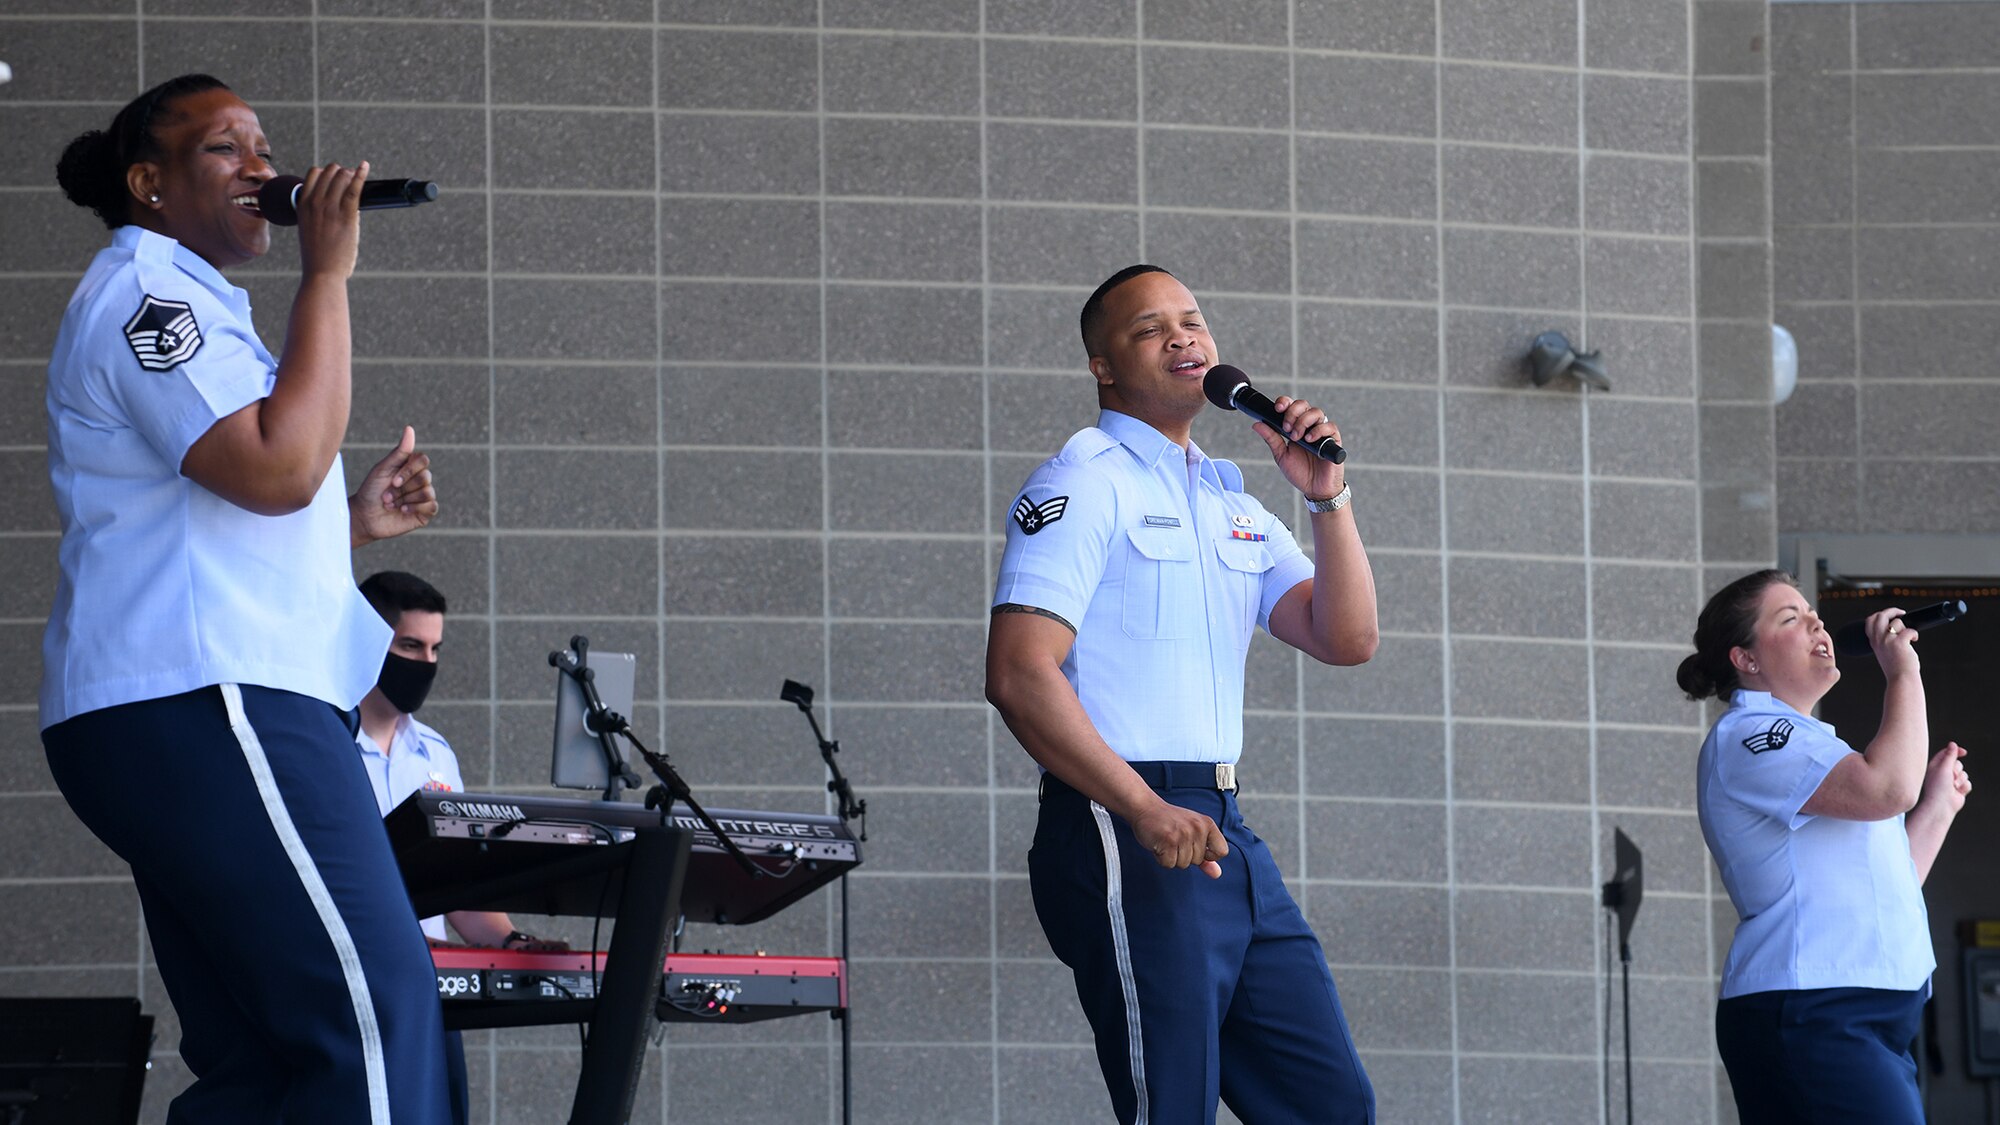 three airmen in uniform holding microphones and singing